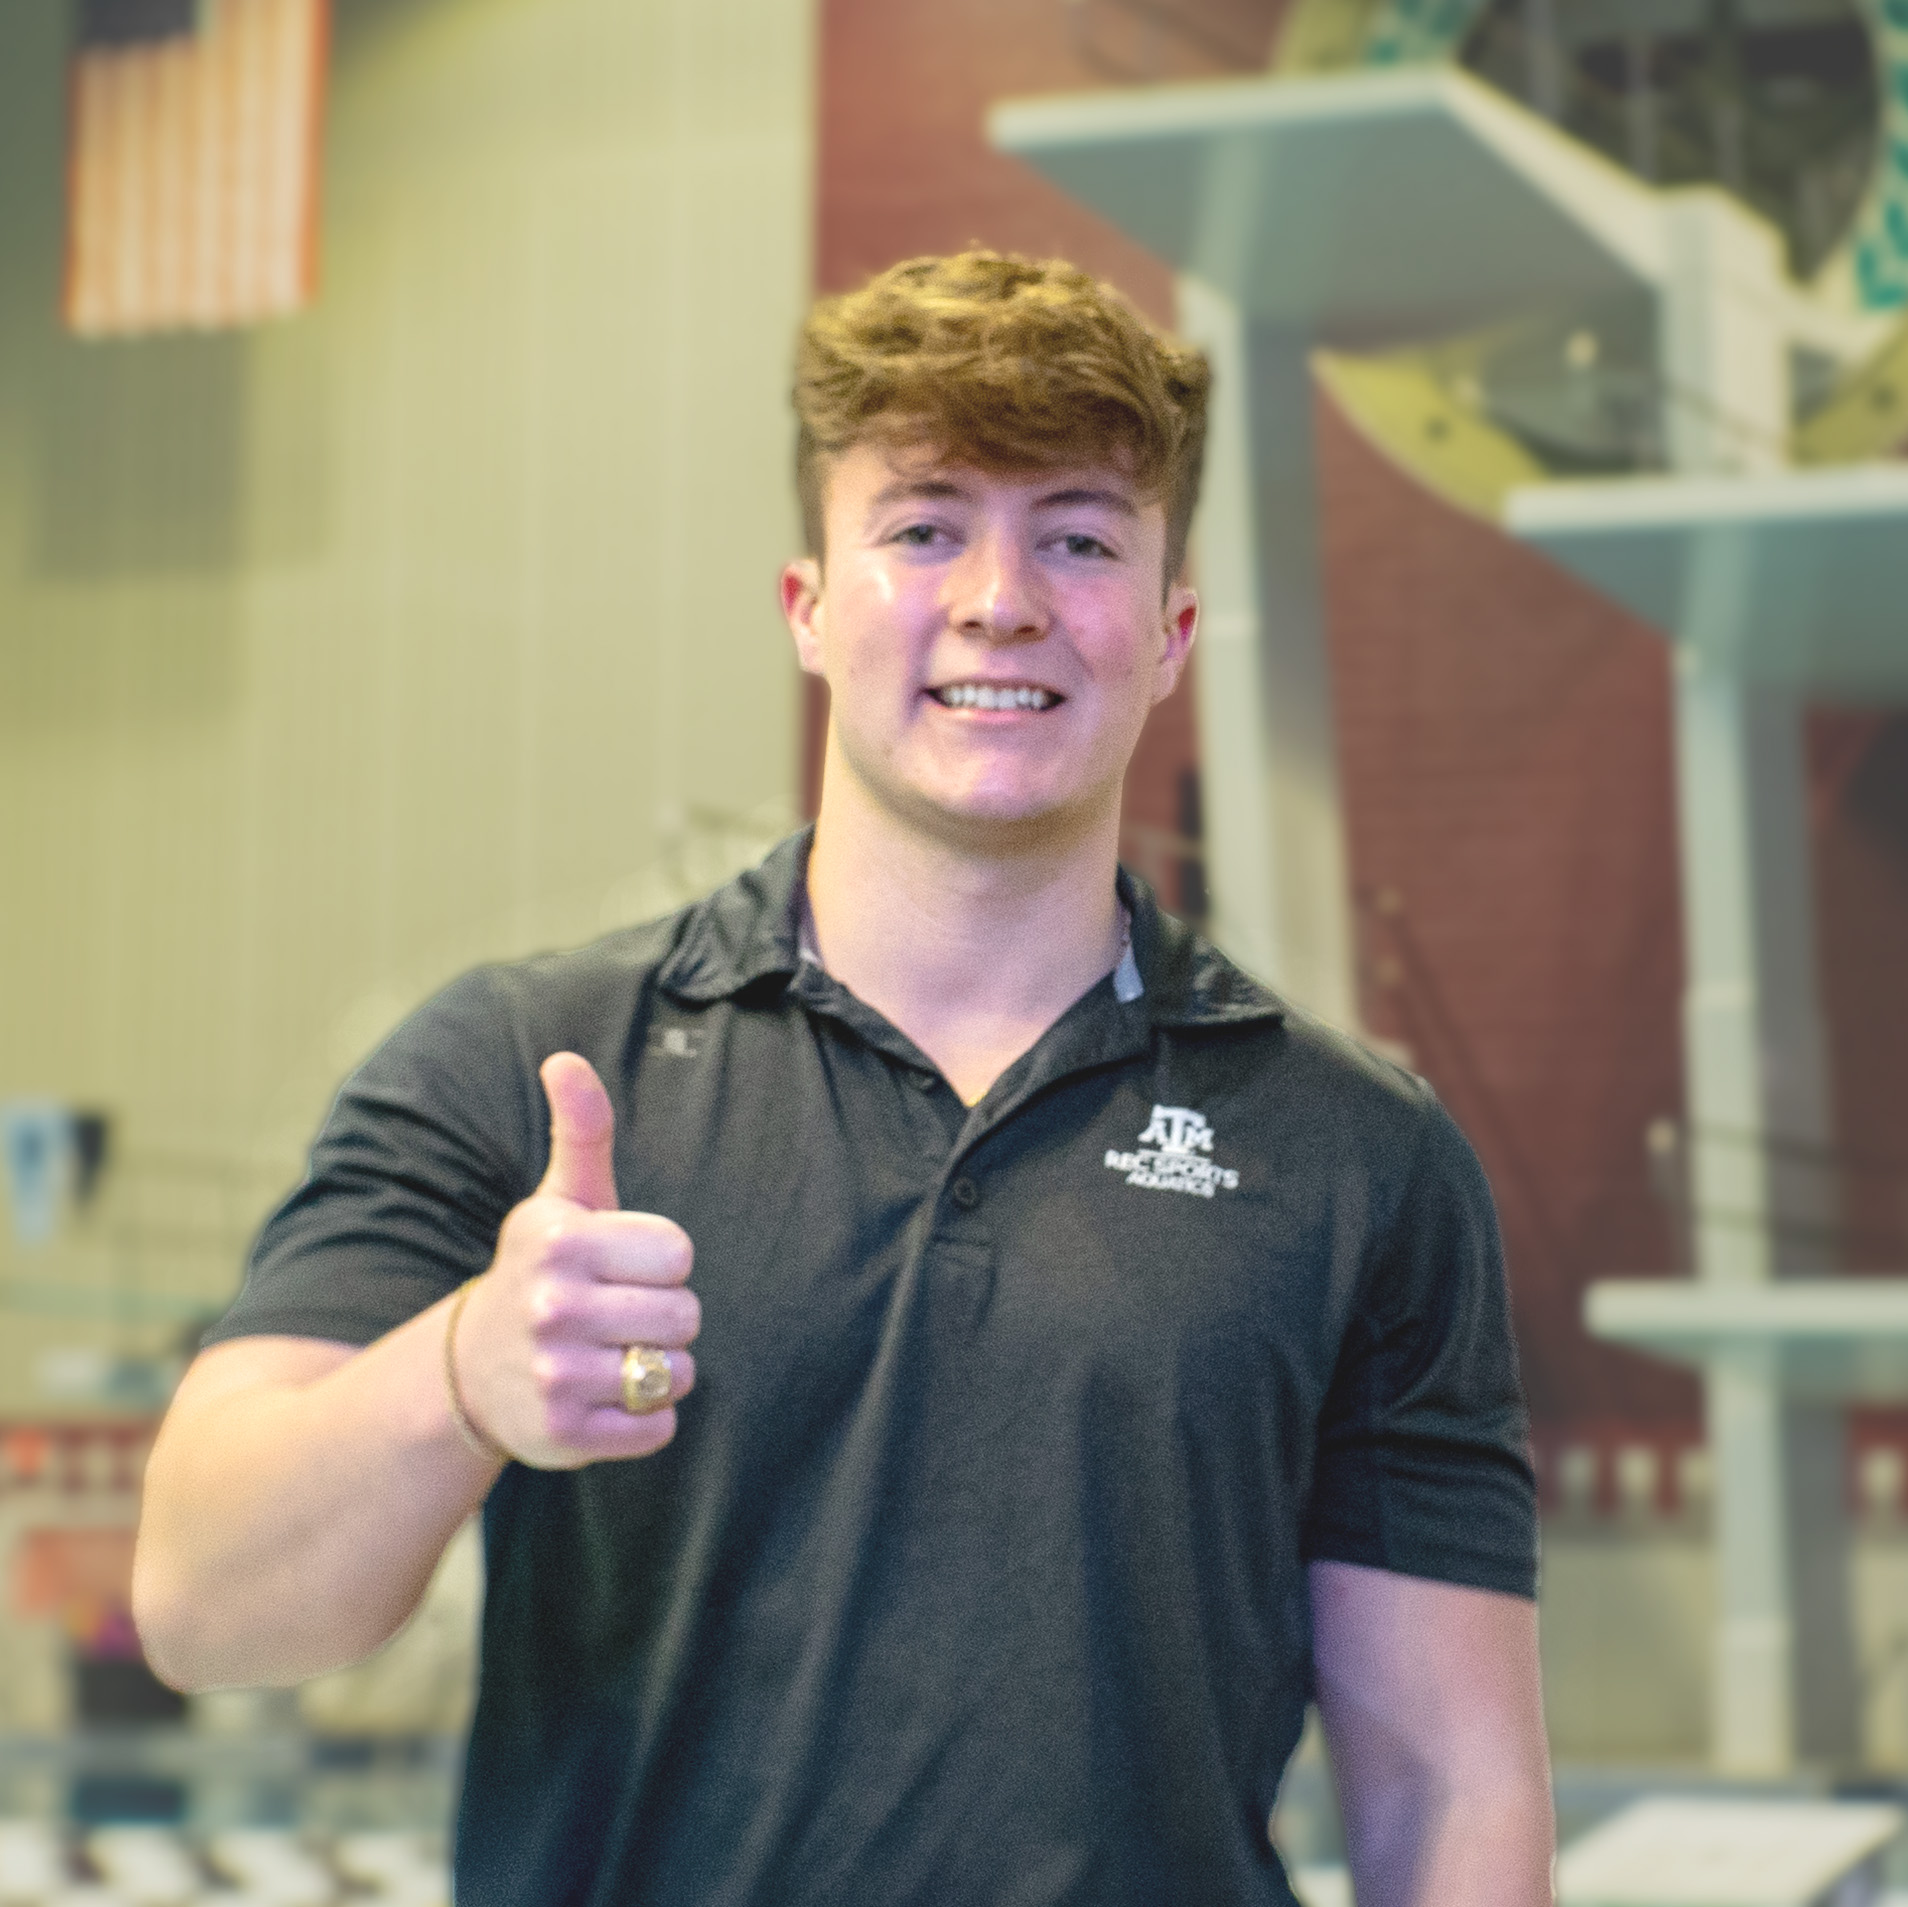 Ciaran is standing in front of the dive well in the Student Rec Center smiling and giving a thumbs up.